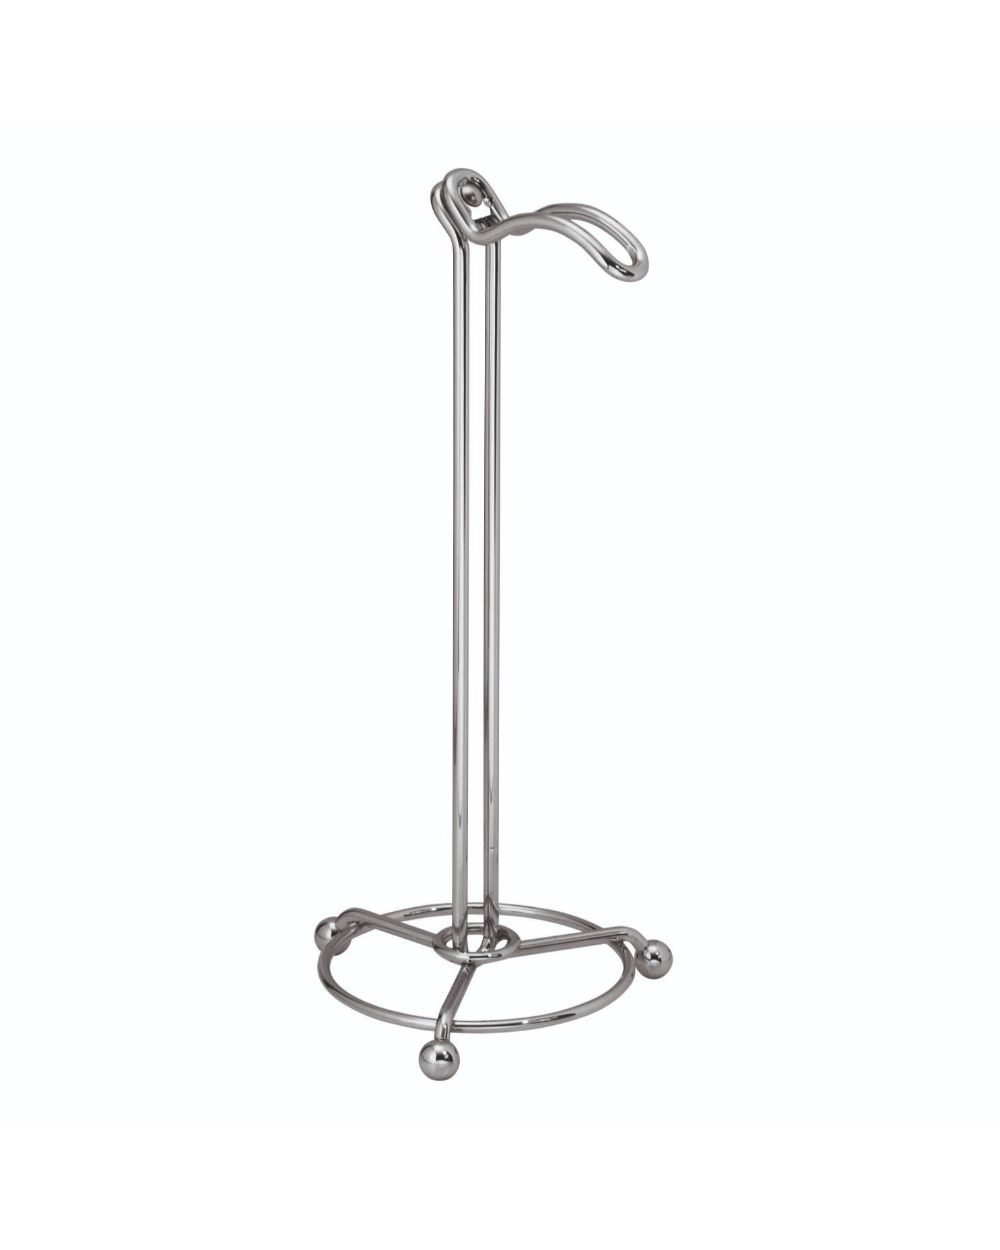 iDesign Classico Wall Mount Paper Towel Holder 14 Chrome